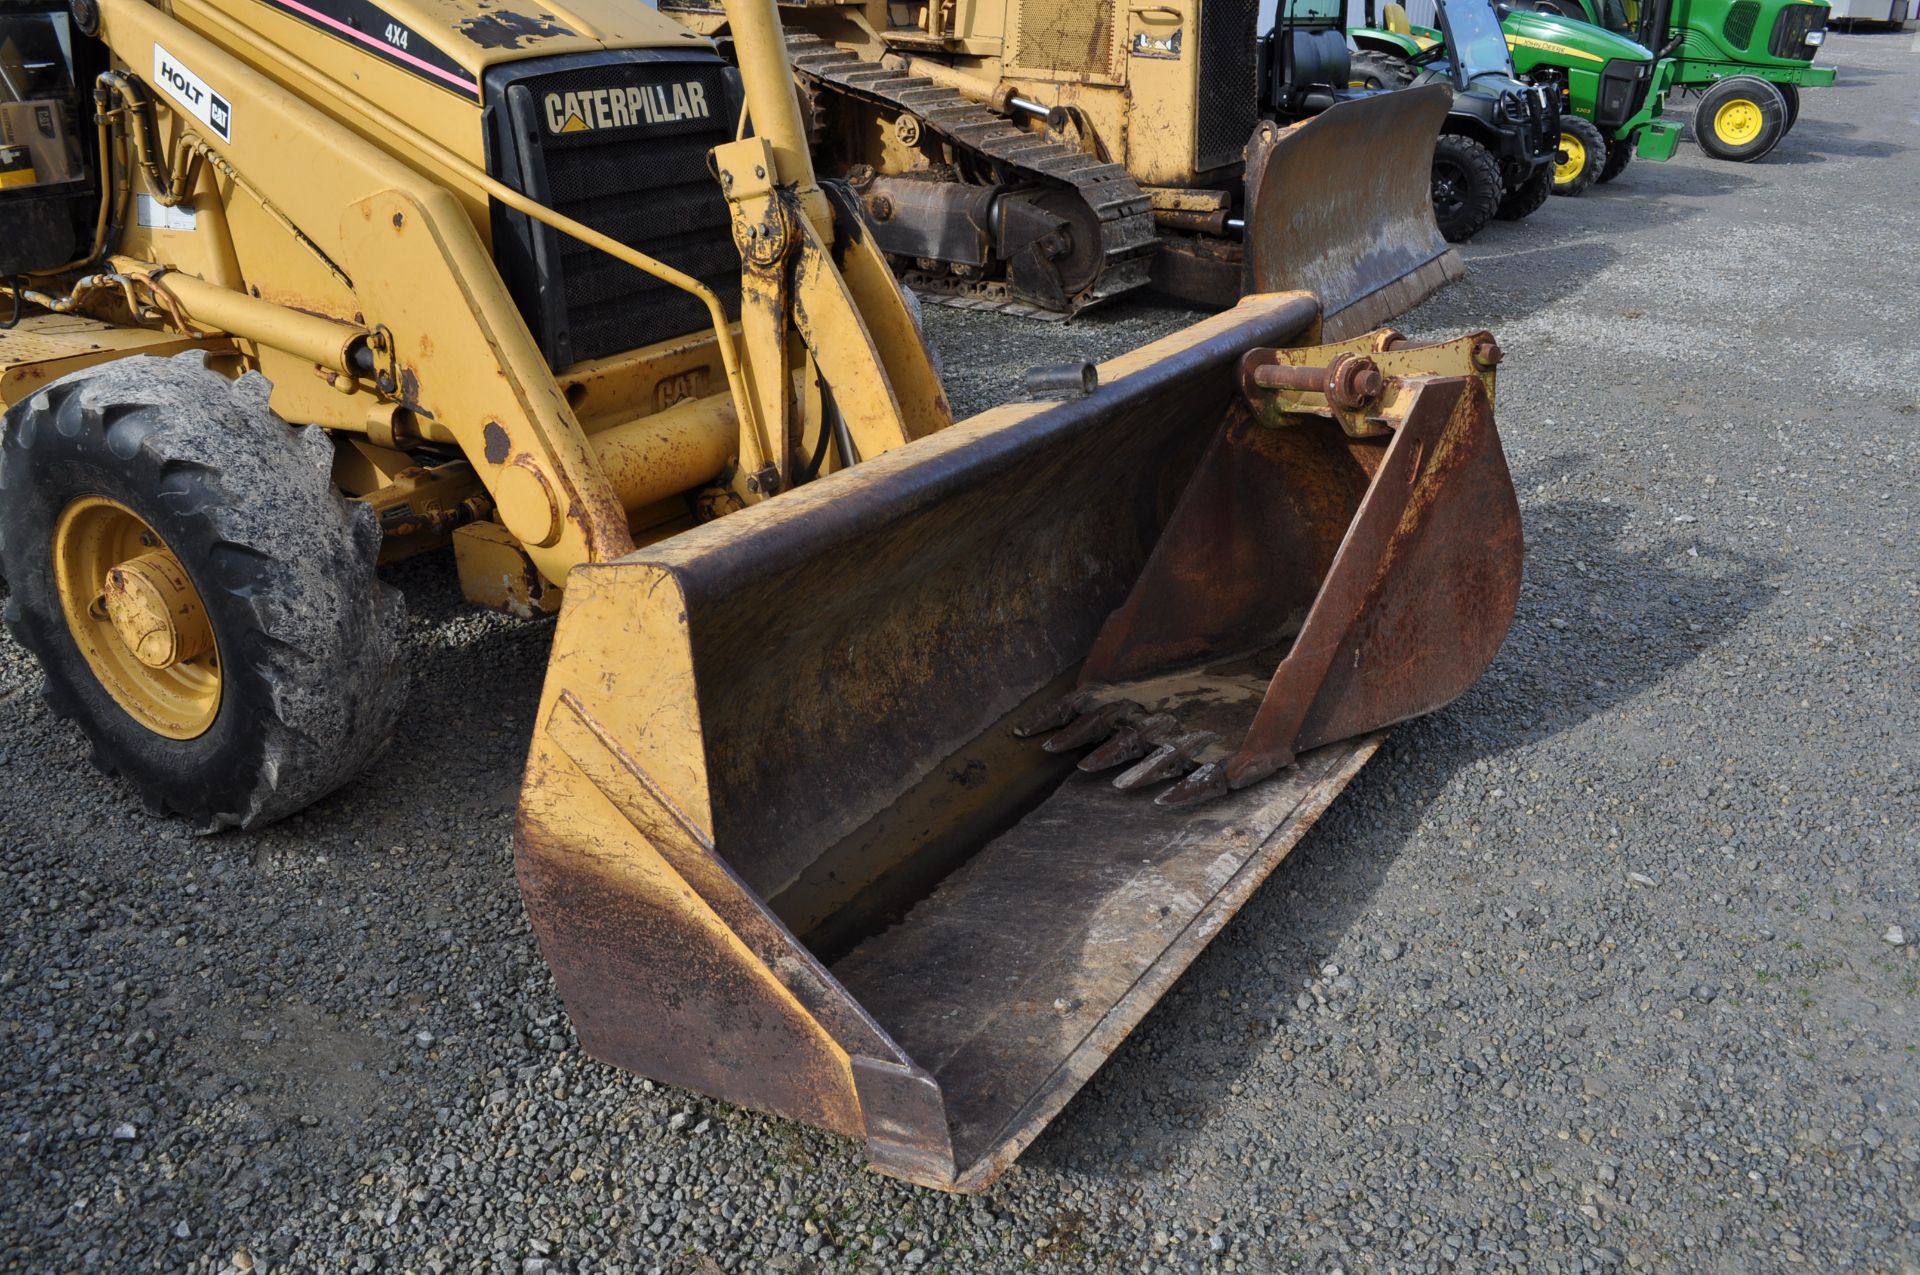 CAT 416C backhoe, 88” bucket, 19.5-24 rear, 12.5/80-18 front, 4x4, 18” and 24” digging buckets - Image 22 of 35